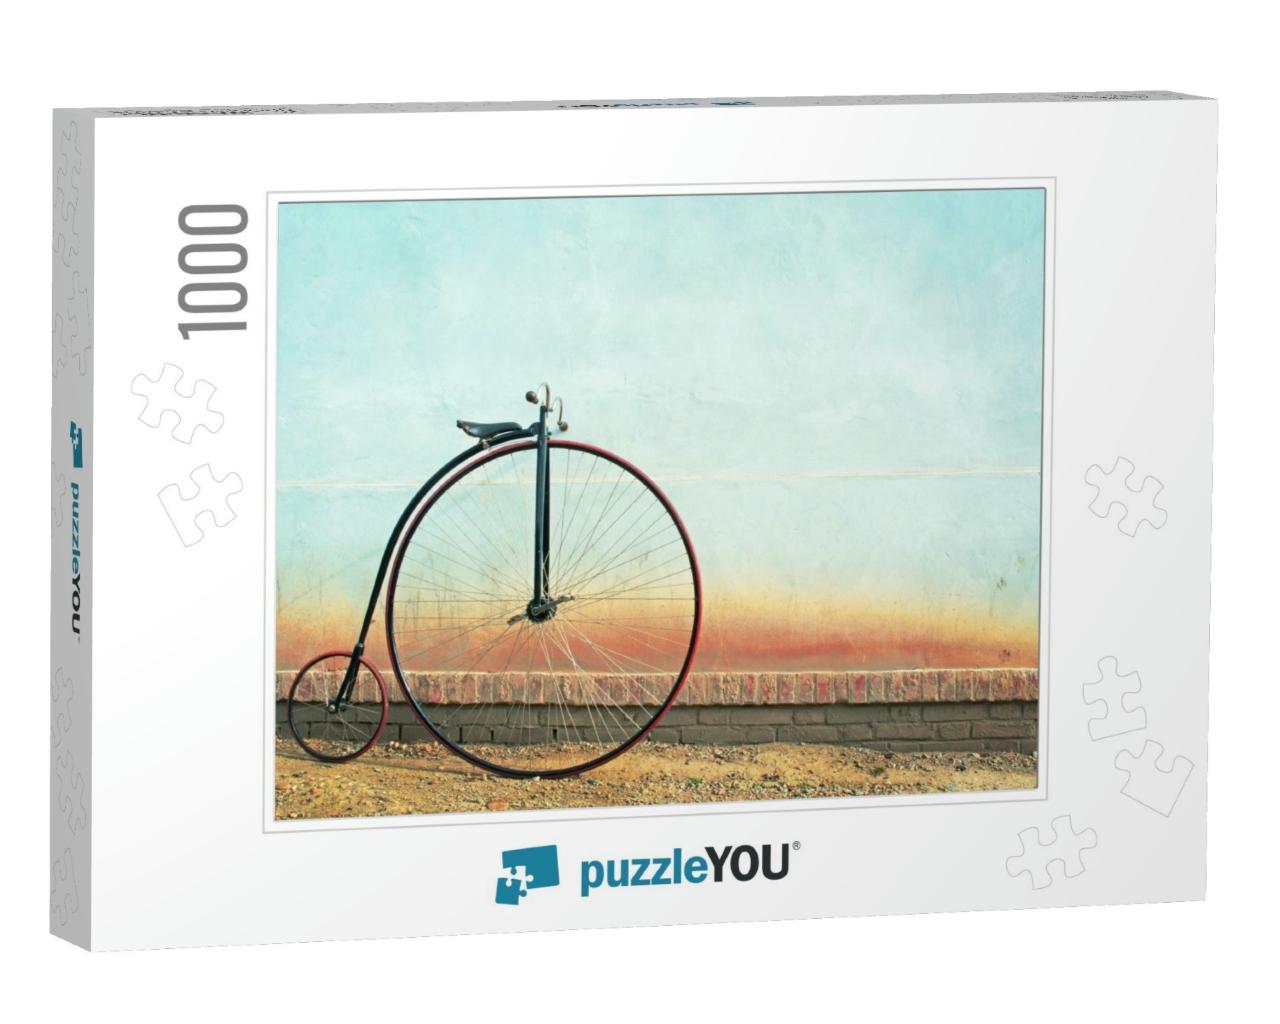 Vintage Bicycle, Penny Farthing, High Wheel, Retro... Jigsaw Puzzle with 1000 pieces